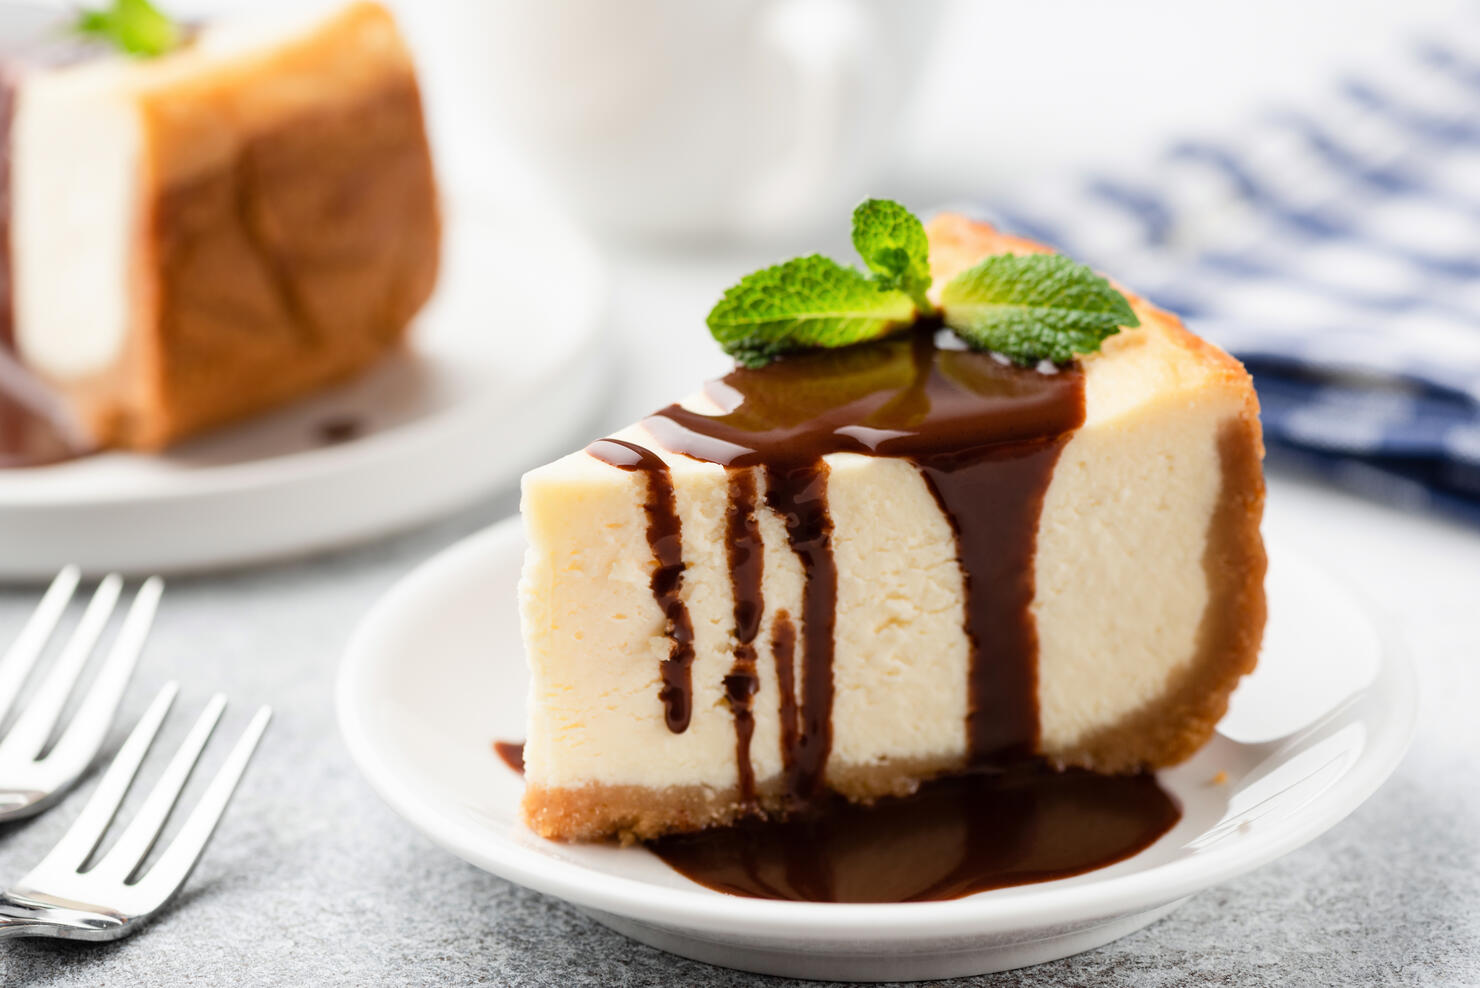 Cheesecake with chocolate sauce on plate